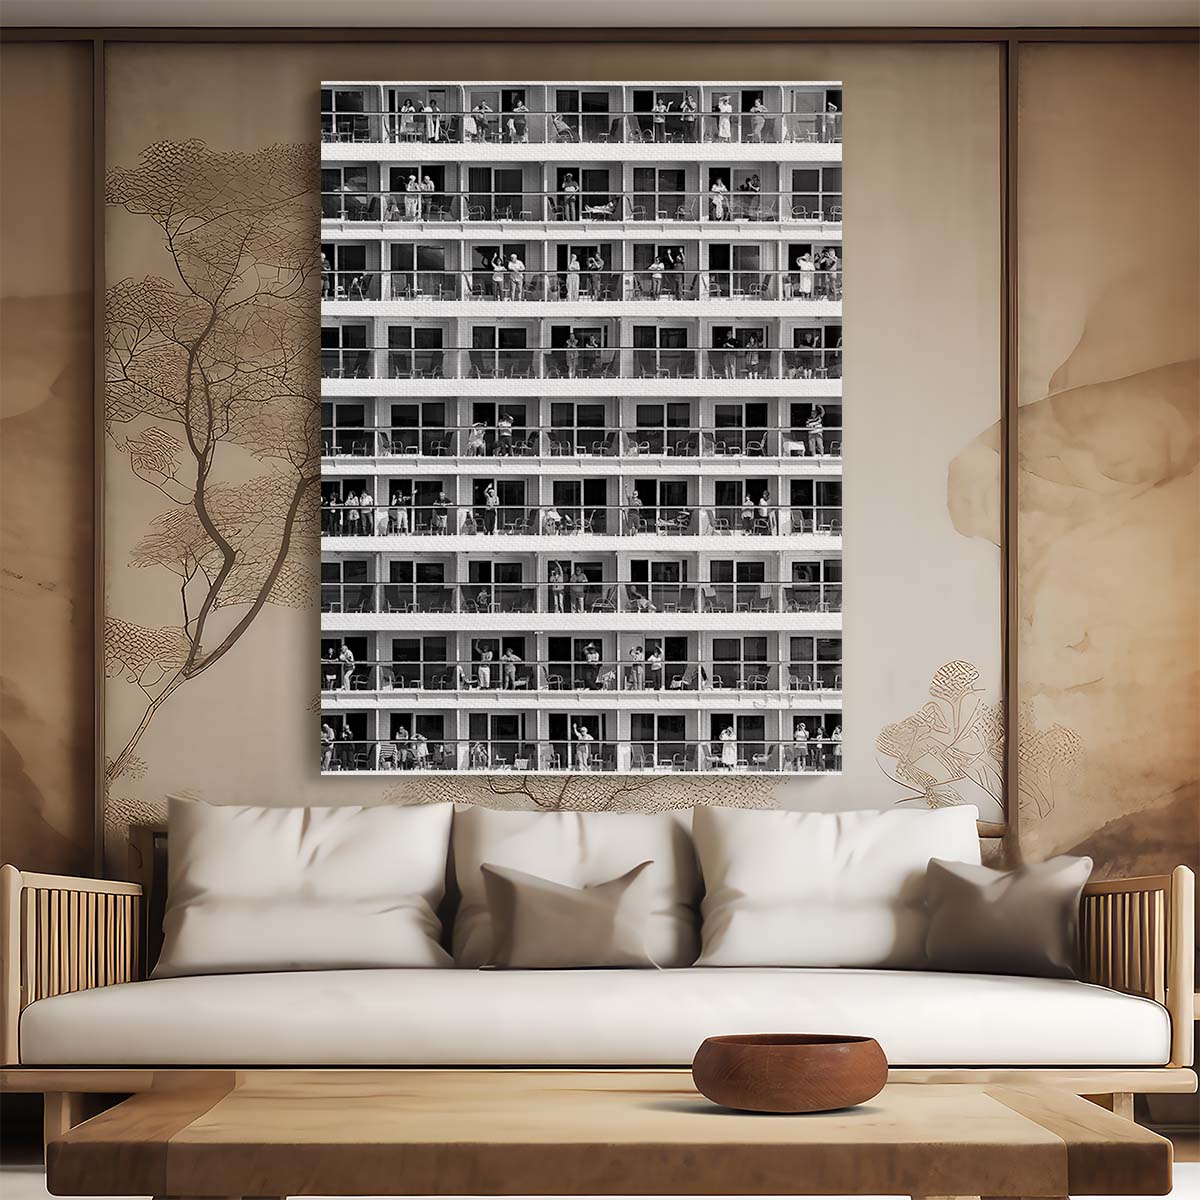 Franz Baumann's Black and White Architectural Photography, Mass Tourism by Luxuriance Designs, made in USA